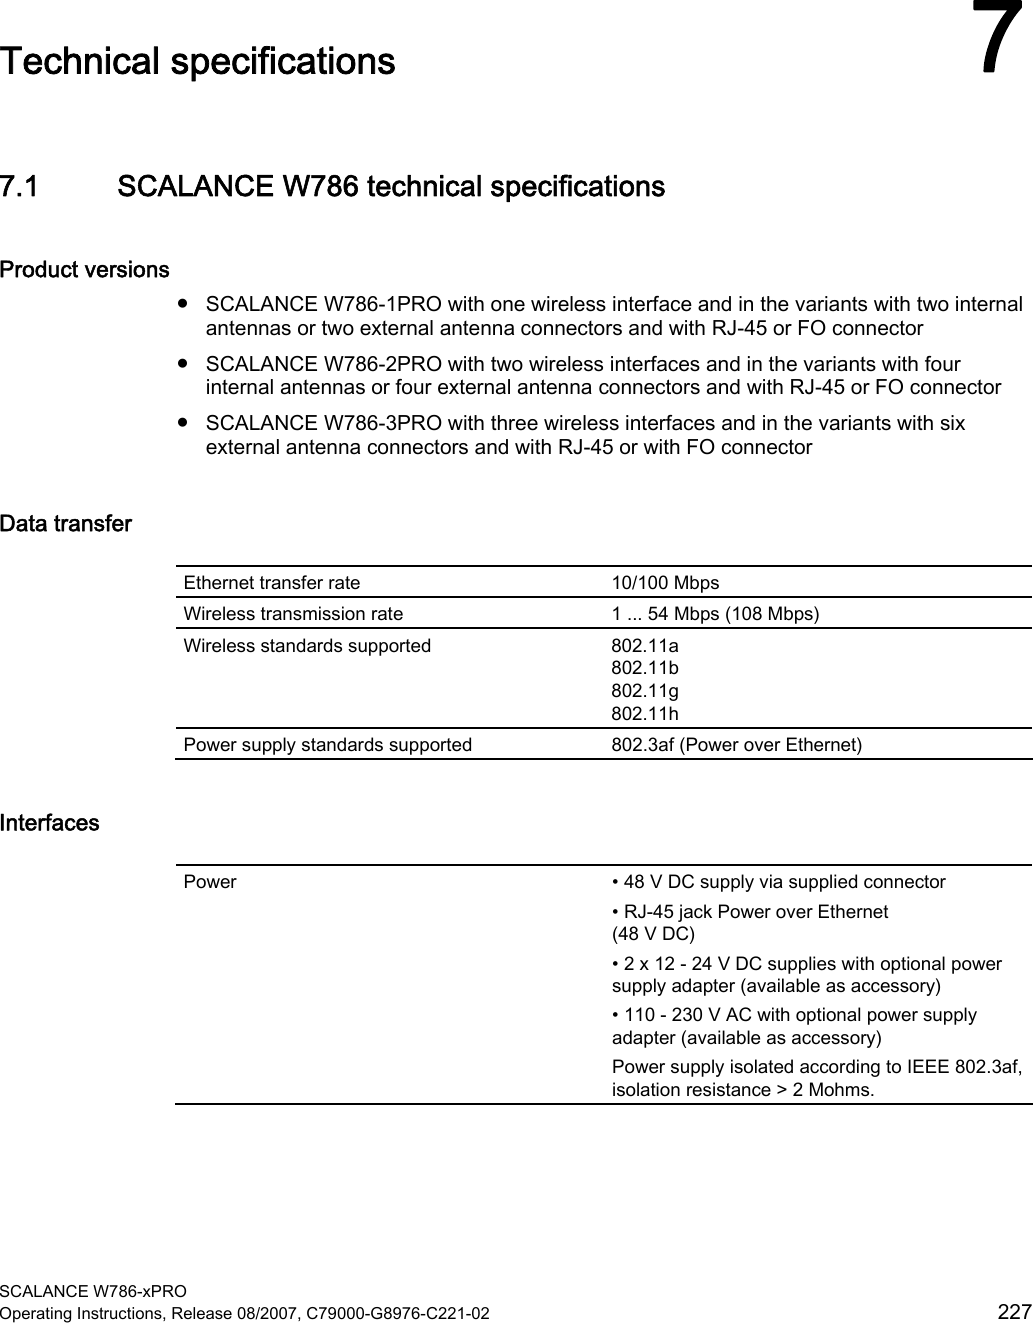  SCALANCE W786-xPRO Operating Instructions, Release 08/2007, C79000-G8976-C221-02  227 Technical specifications 77.1 SCALANCE W786 technical specifications Product versions ● SCALANCE W786-1PRO with one wireless interface and in the variants with two internal antennas or two external antenna connectors and with RJ-45 or FO connector ● SCALANCE W786-2PRO with two wireless interfaces and in the variants with four internal antennas or four external antenna connectors and with RJ-45 or FO connector ● SCALANCE W786-3PRO with three wireless interfaces and in the variants with six external antenna connectors and with RJ-45 or with FO connector Data transfer  Ethernet transfer rate  10/100 Mbps Wireless transmission rate  1 ... 54 Mbps (108 Mbps) Wireless standards supported  802.11a 802.11b 802.11g 802.11h Power supply standards supported  802.3af (Power over Ethernet) Interfaces  Power  • 48 V DC supply via supplied connector • RJ-45 jack Power over Ethernet (48 V DC) • 2 x 12 - 24 V DC supplies with optional power supply adapter (available as accessory) • 110 - 230 V AC with optional power supply adapter (available as accessory) Power supply isolated according to IEEE 802.3af, isolation resistance &gt; 2 Mohms. 